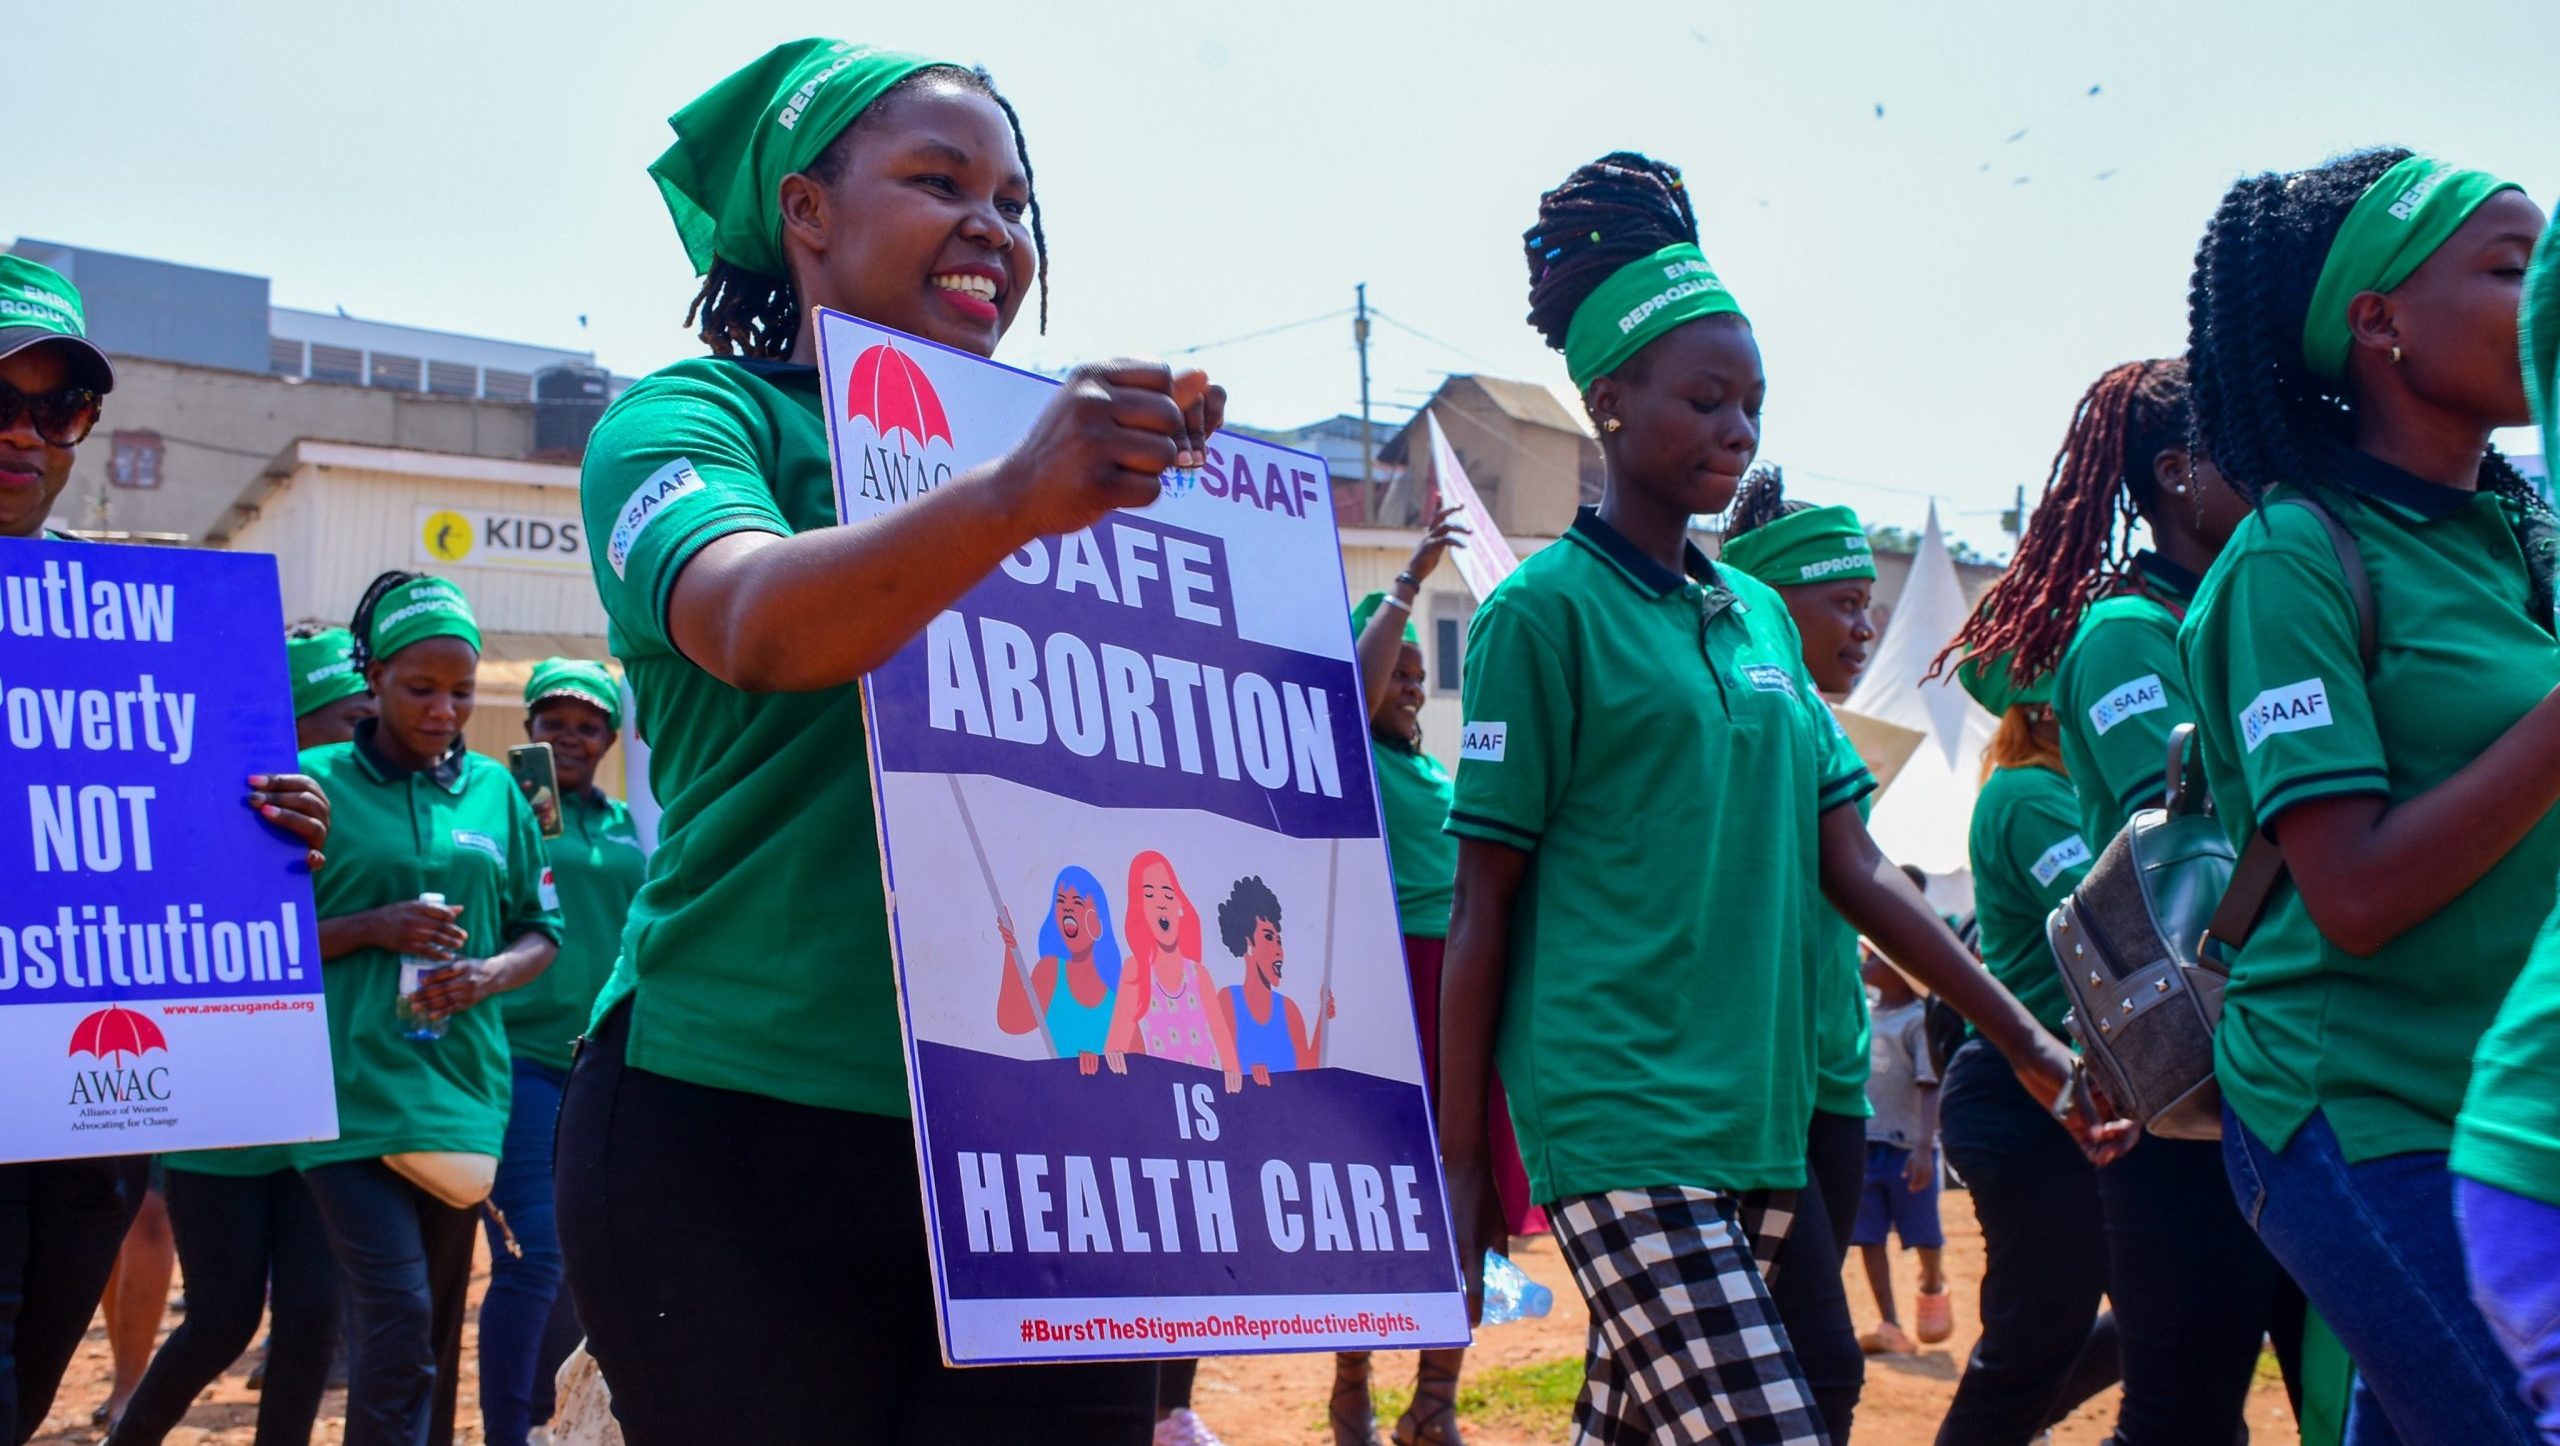 Featured image for “The global abortion rights movement is unstoppable”